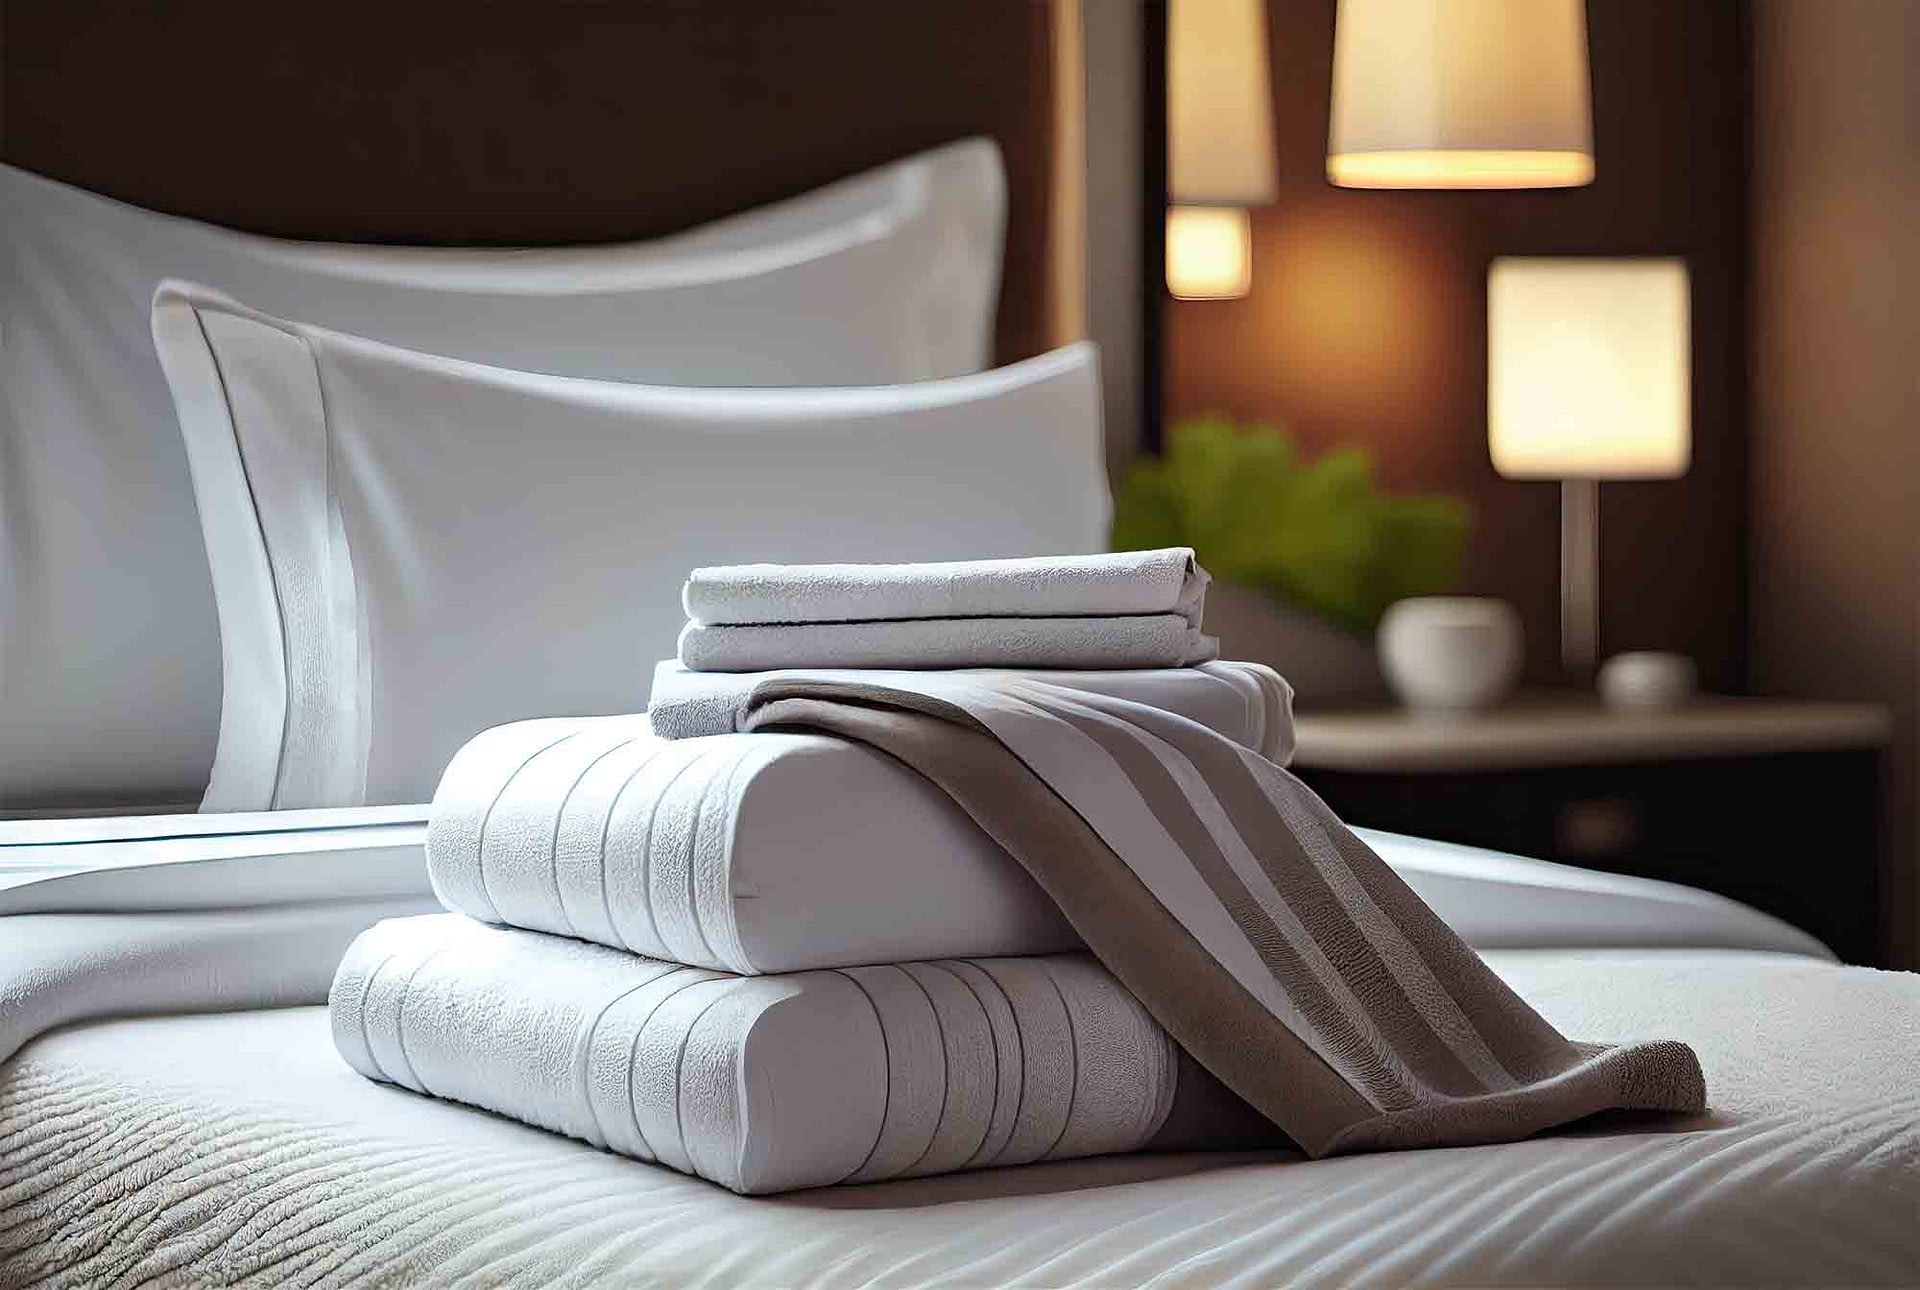 Towels hospitality industry